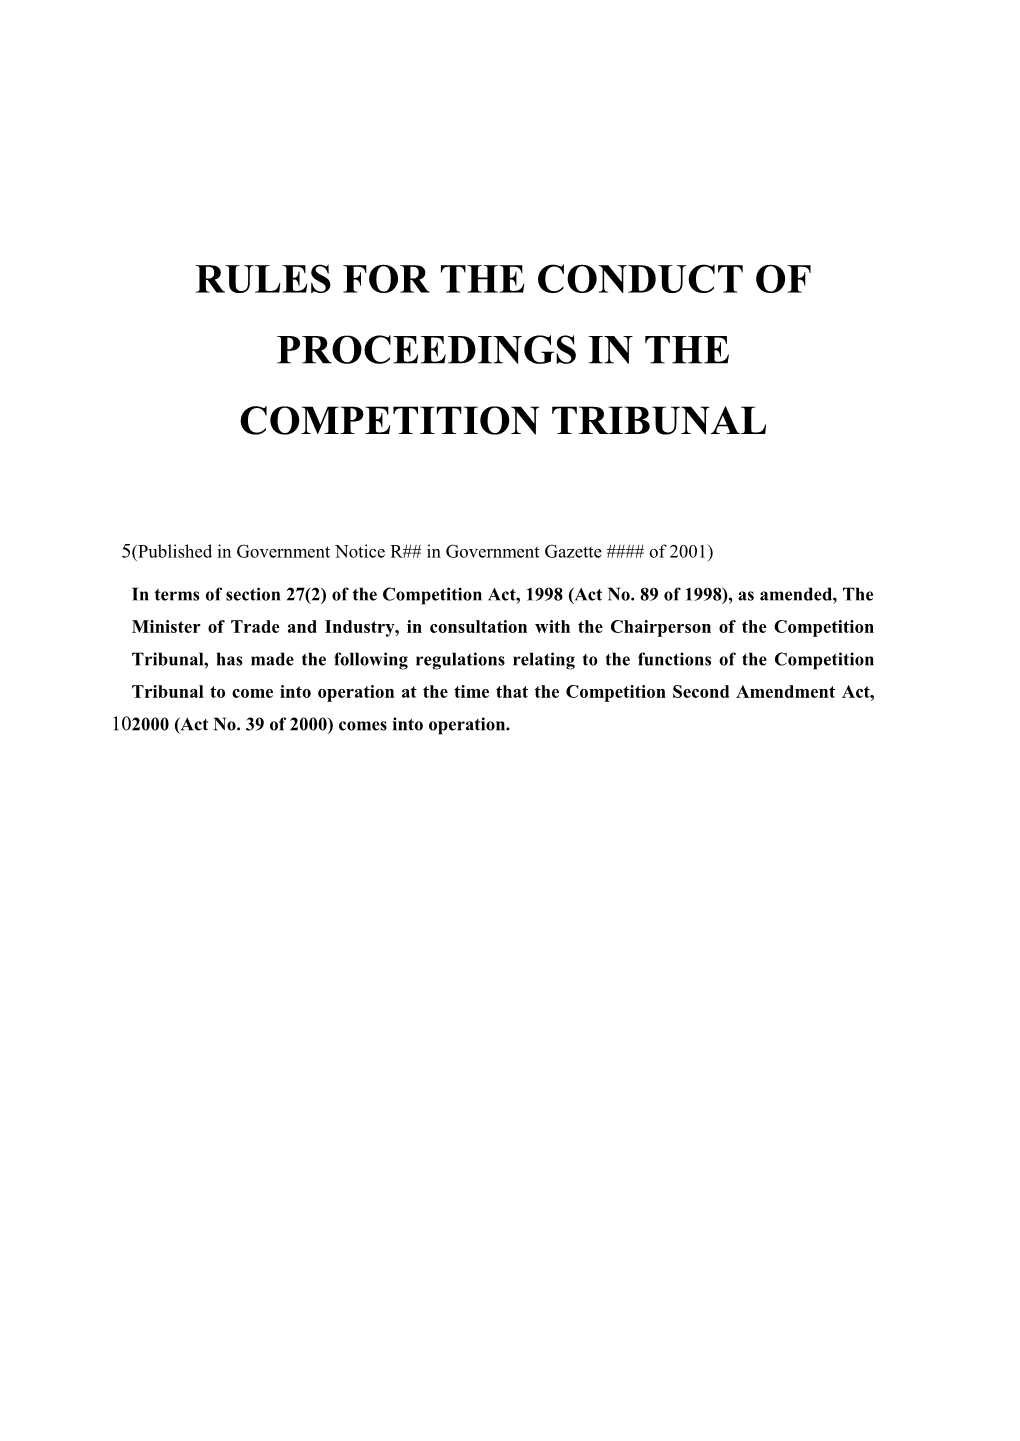 Rules for the Conduct of Proceedings in the Competition Tribunal